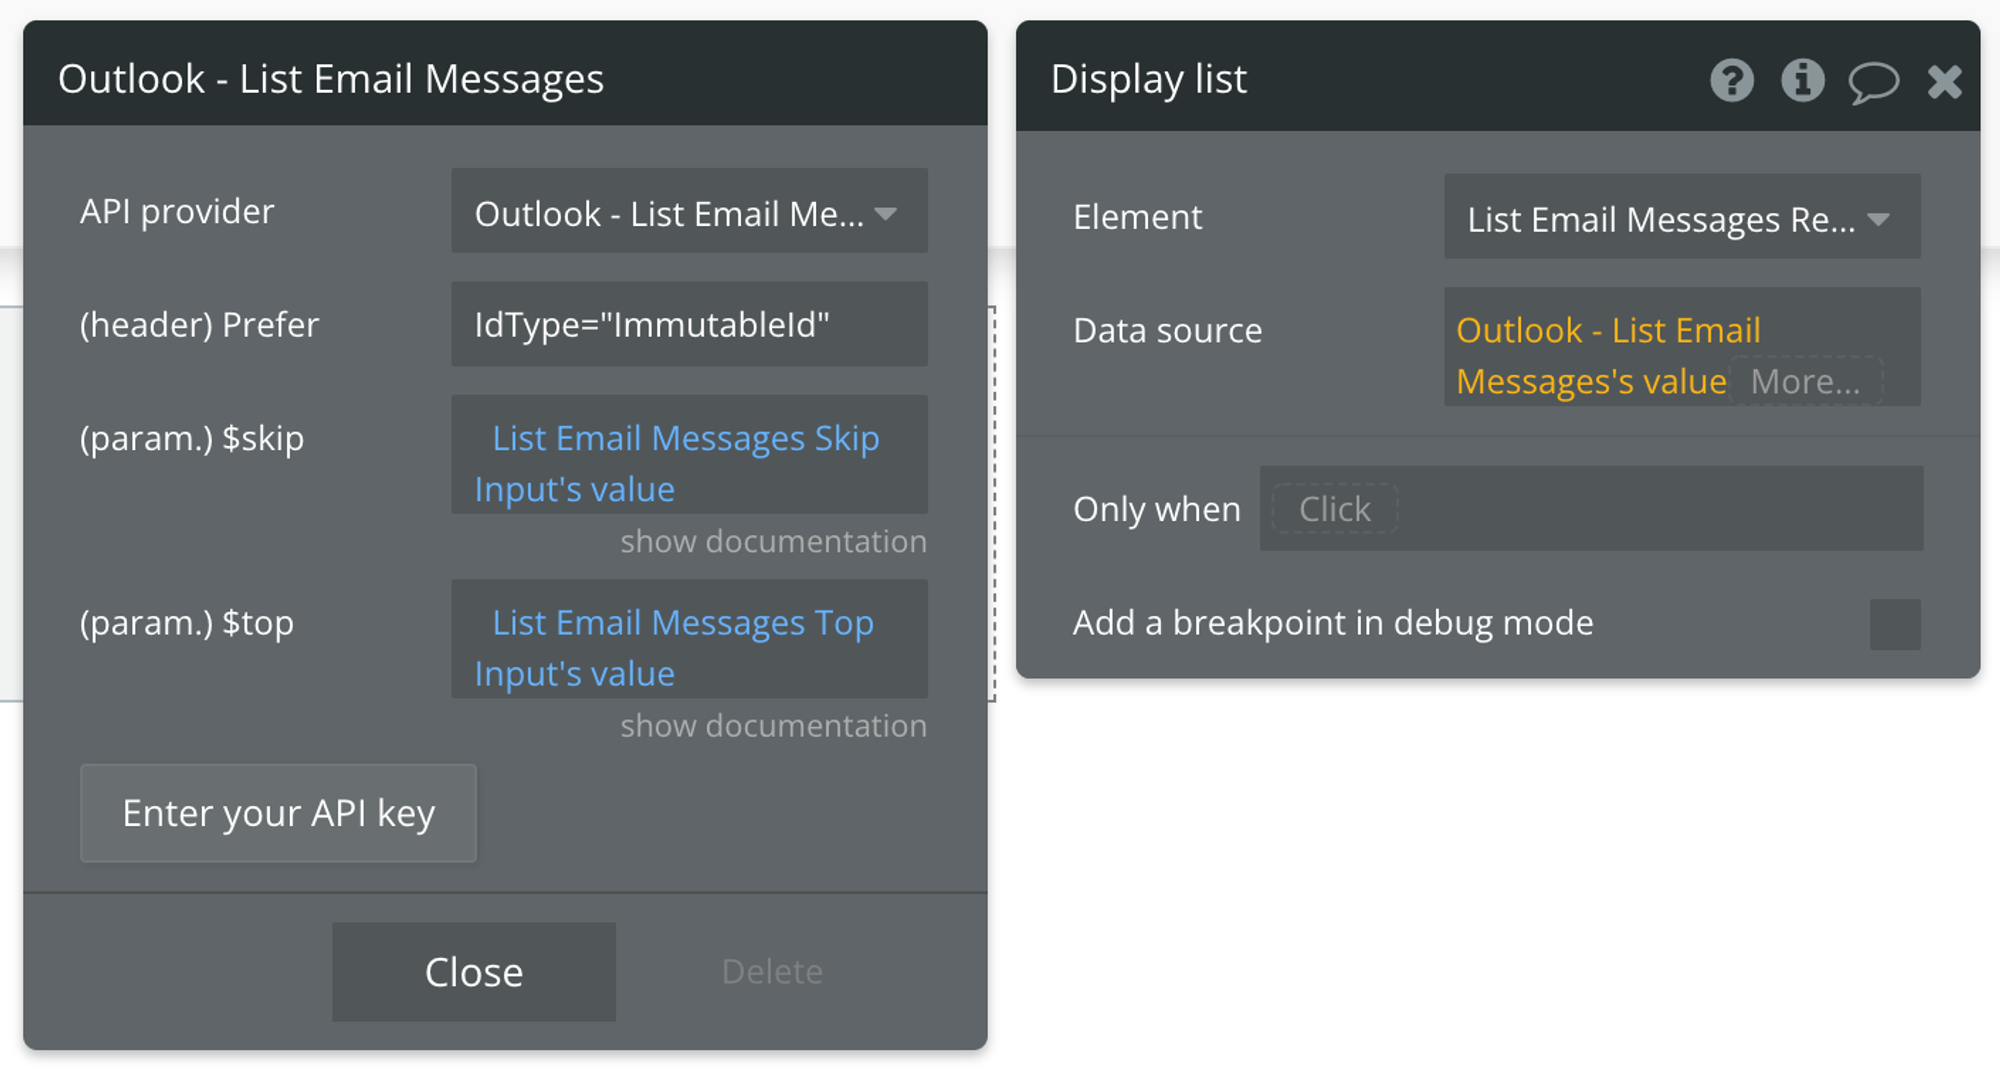 Select Outlook - List Email Messages's value for the data source